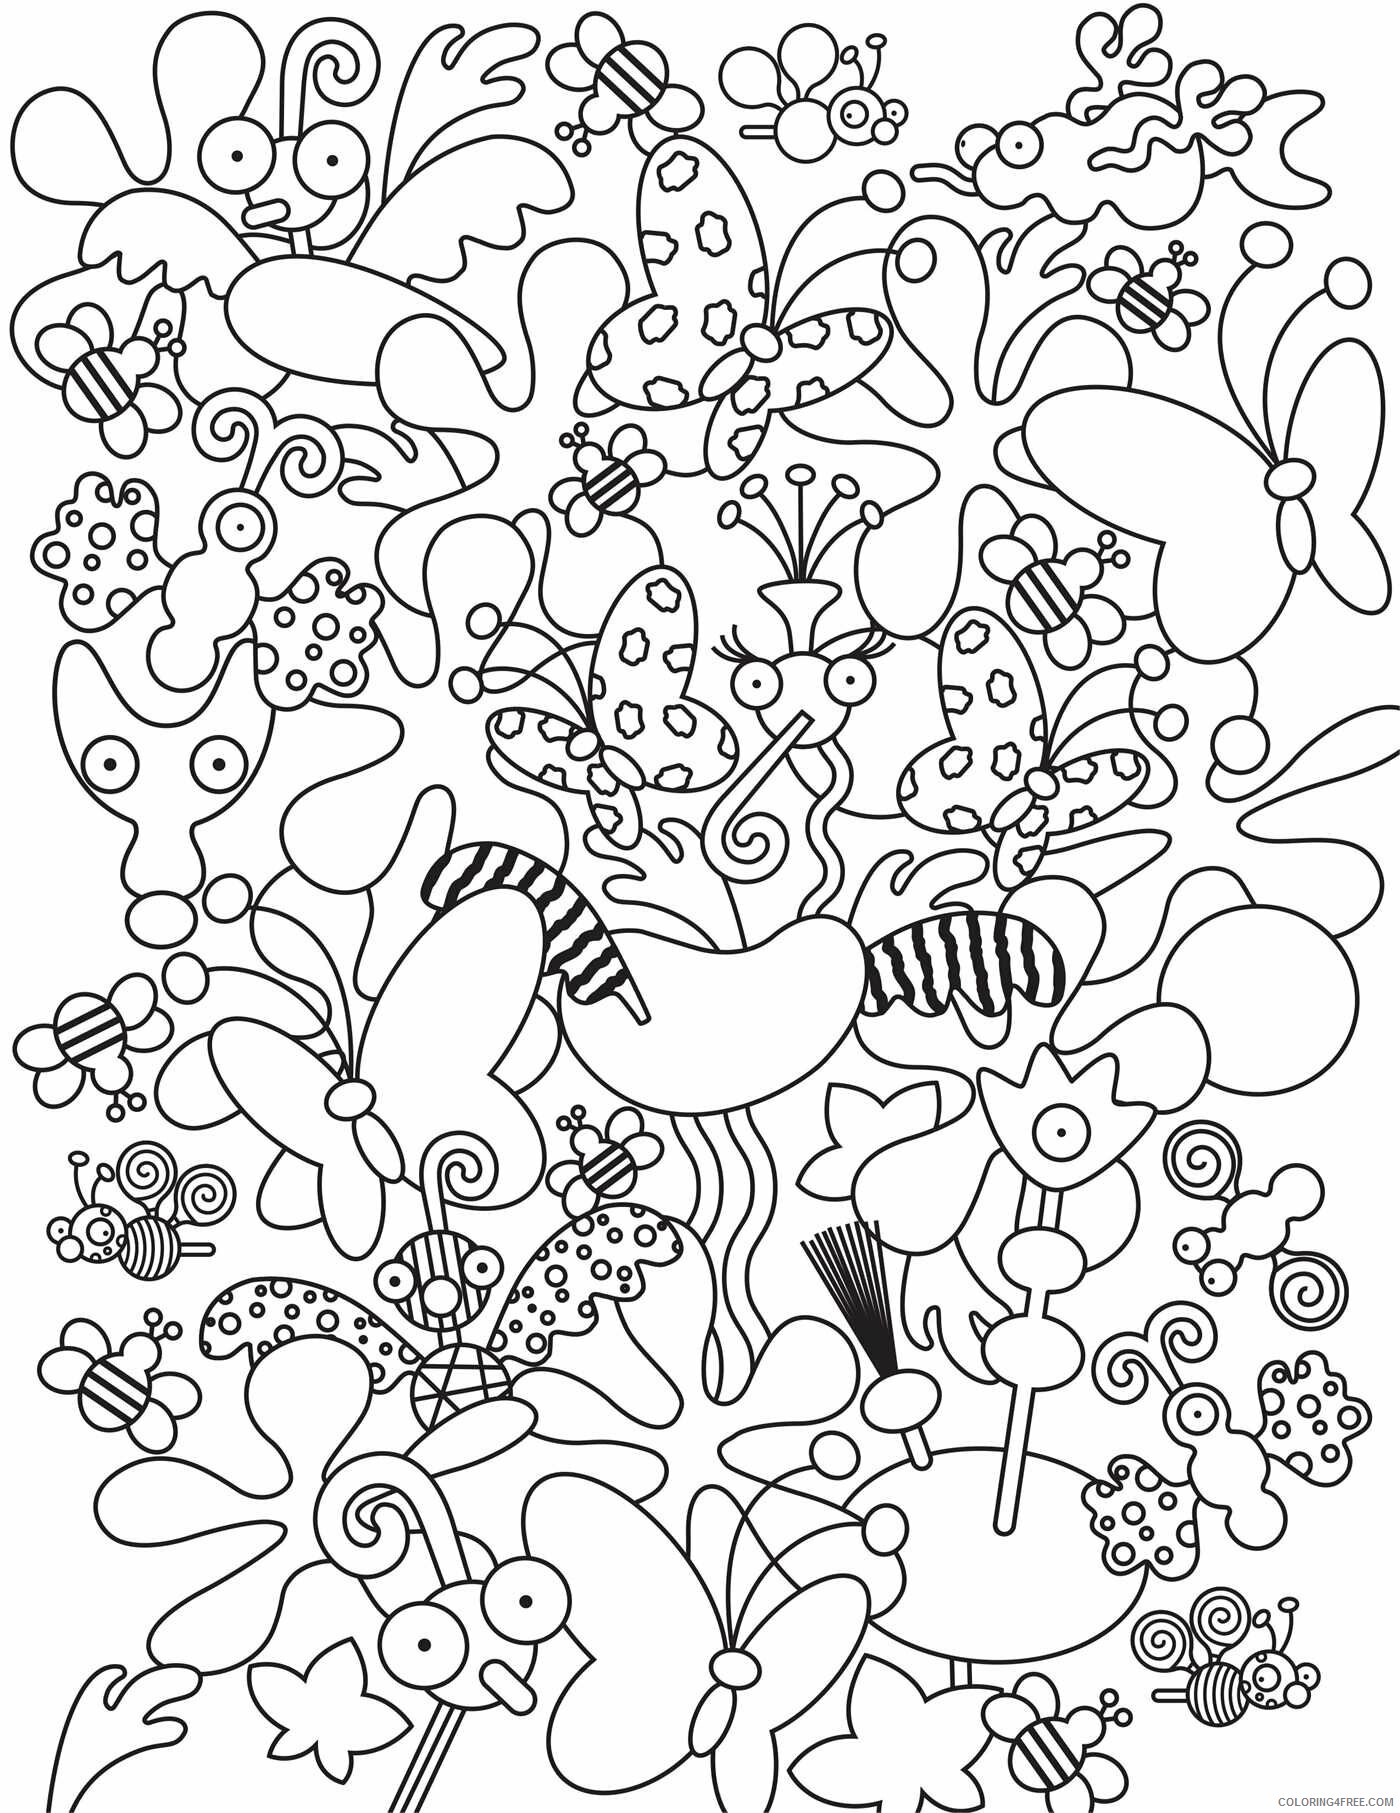 Doodle Coloring Pages Adult Adult Doodle Printable 2020 322 Coloring4free